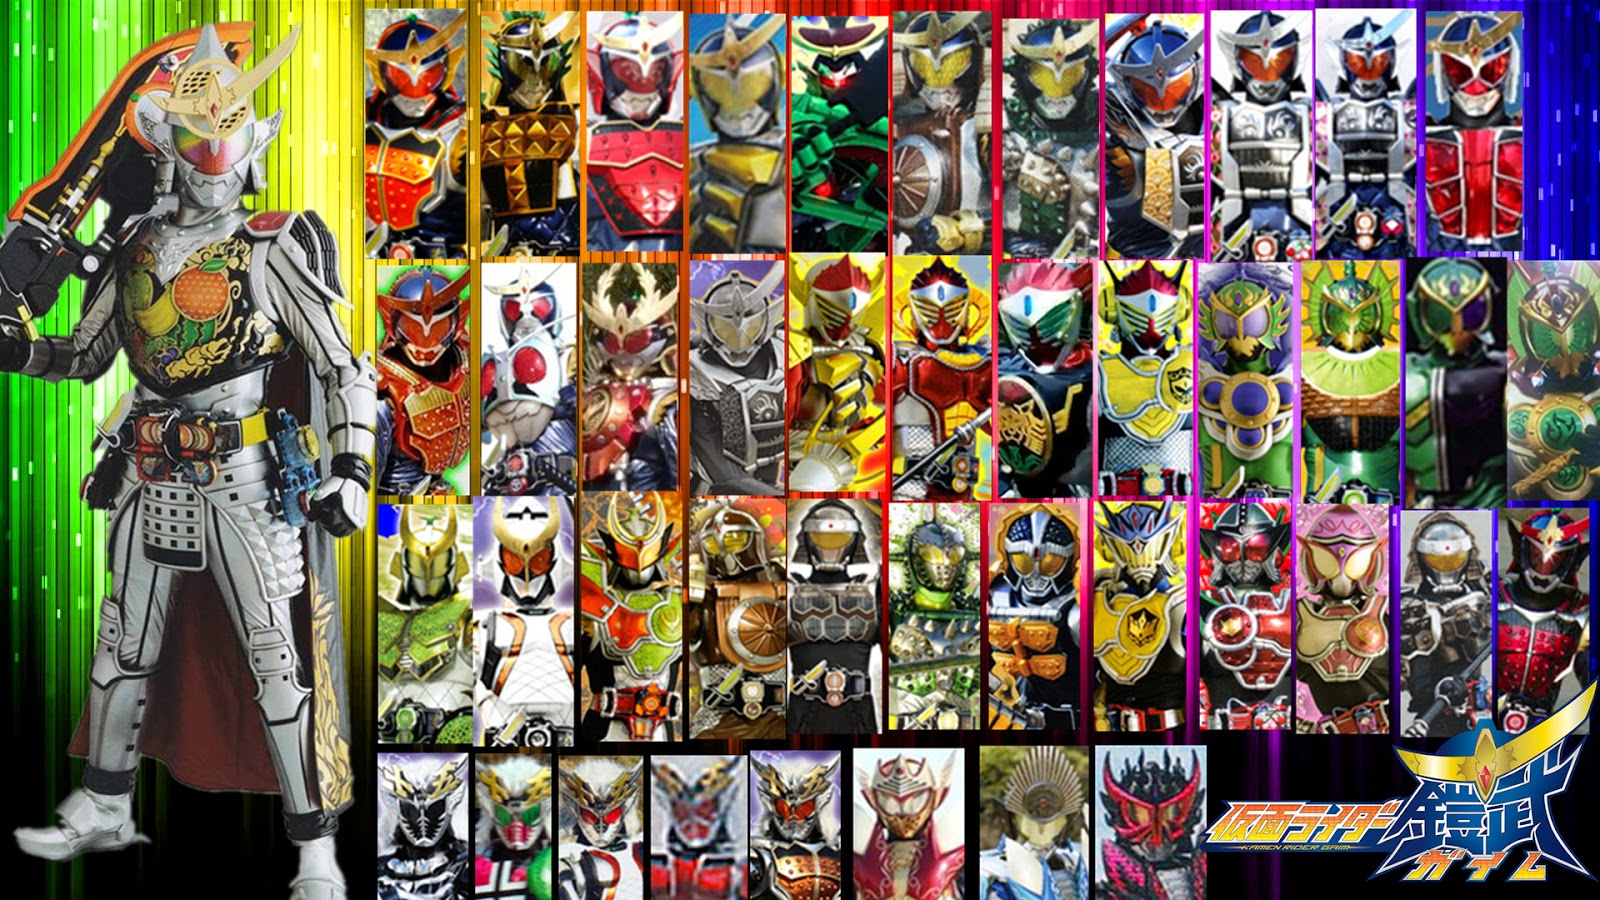 kamen rider ghost wallpaper,collection,toy,art,action figure,anime